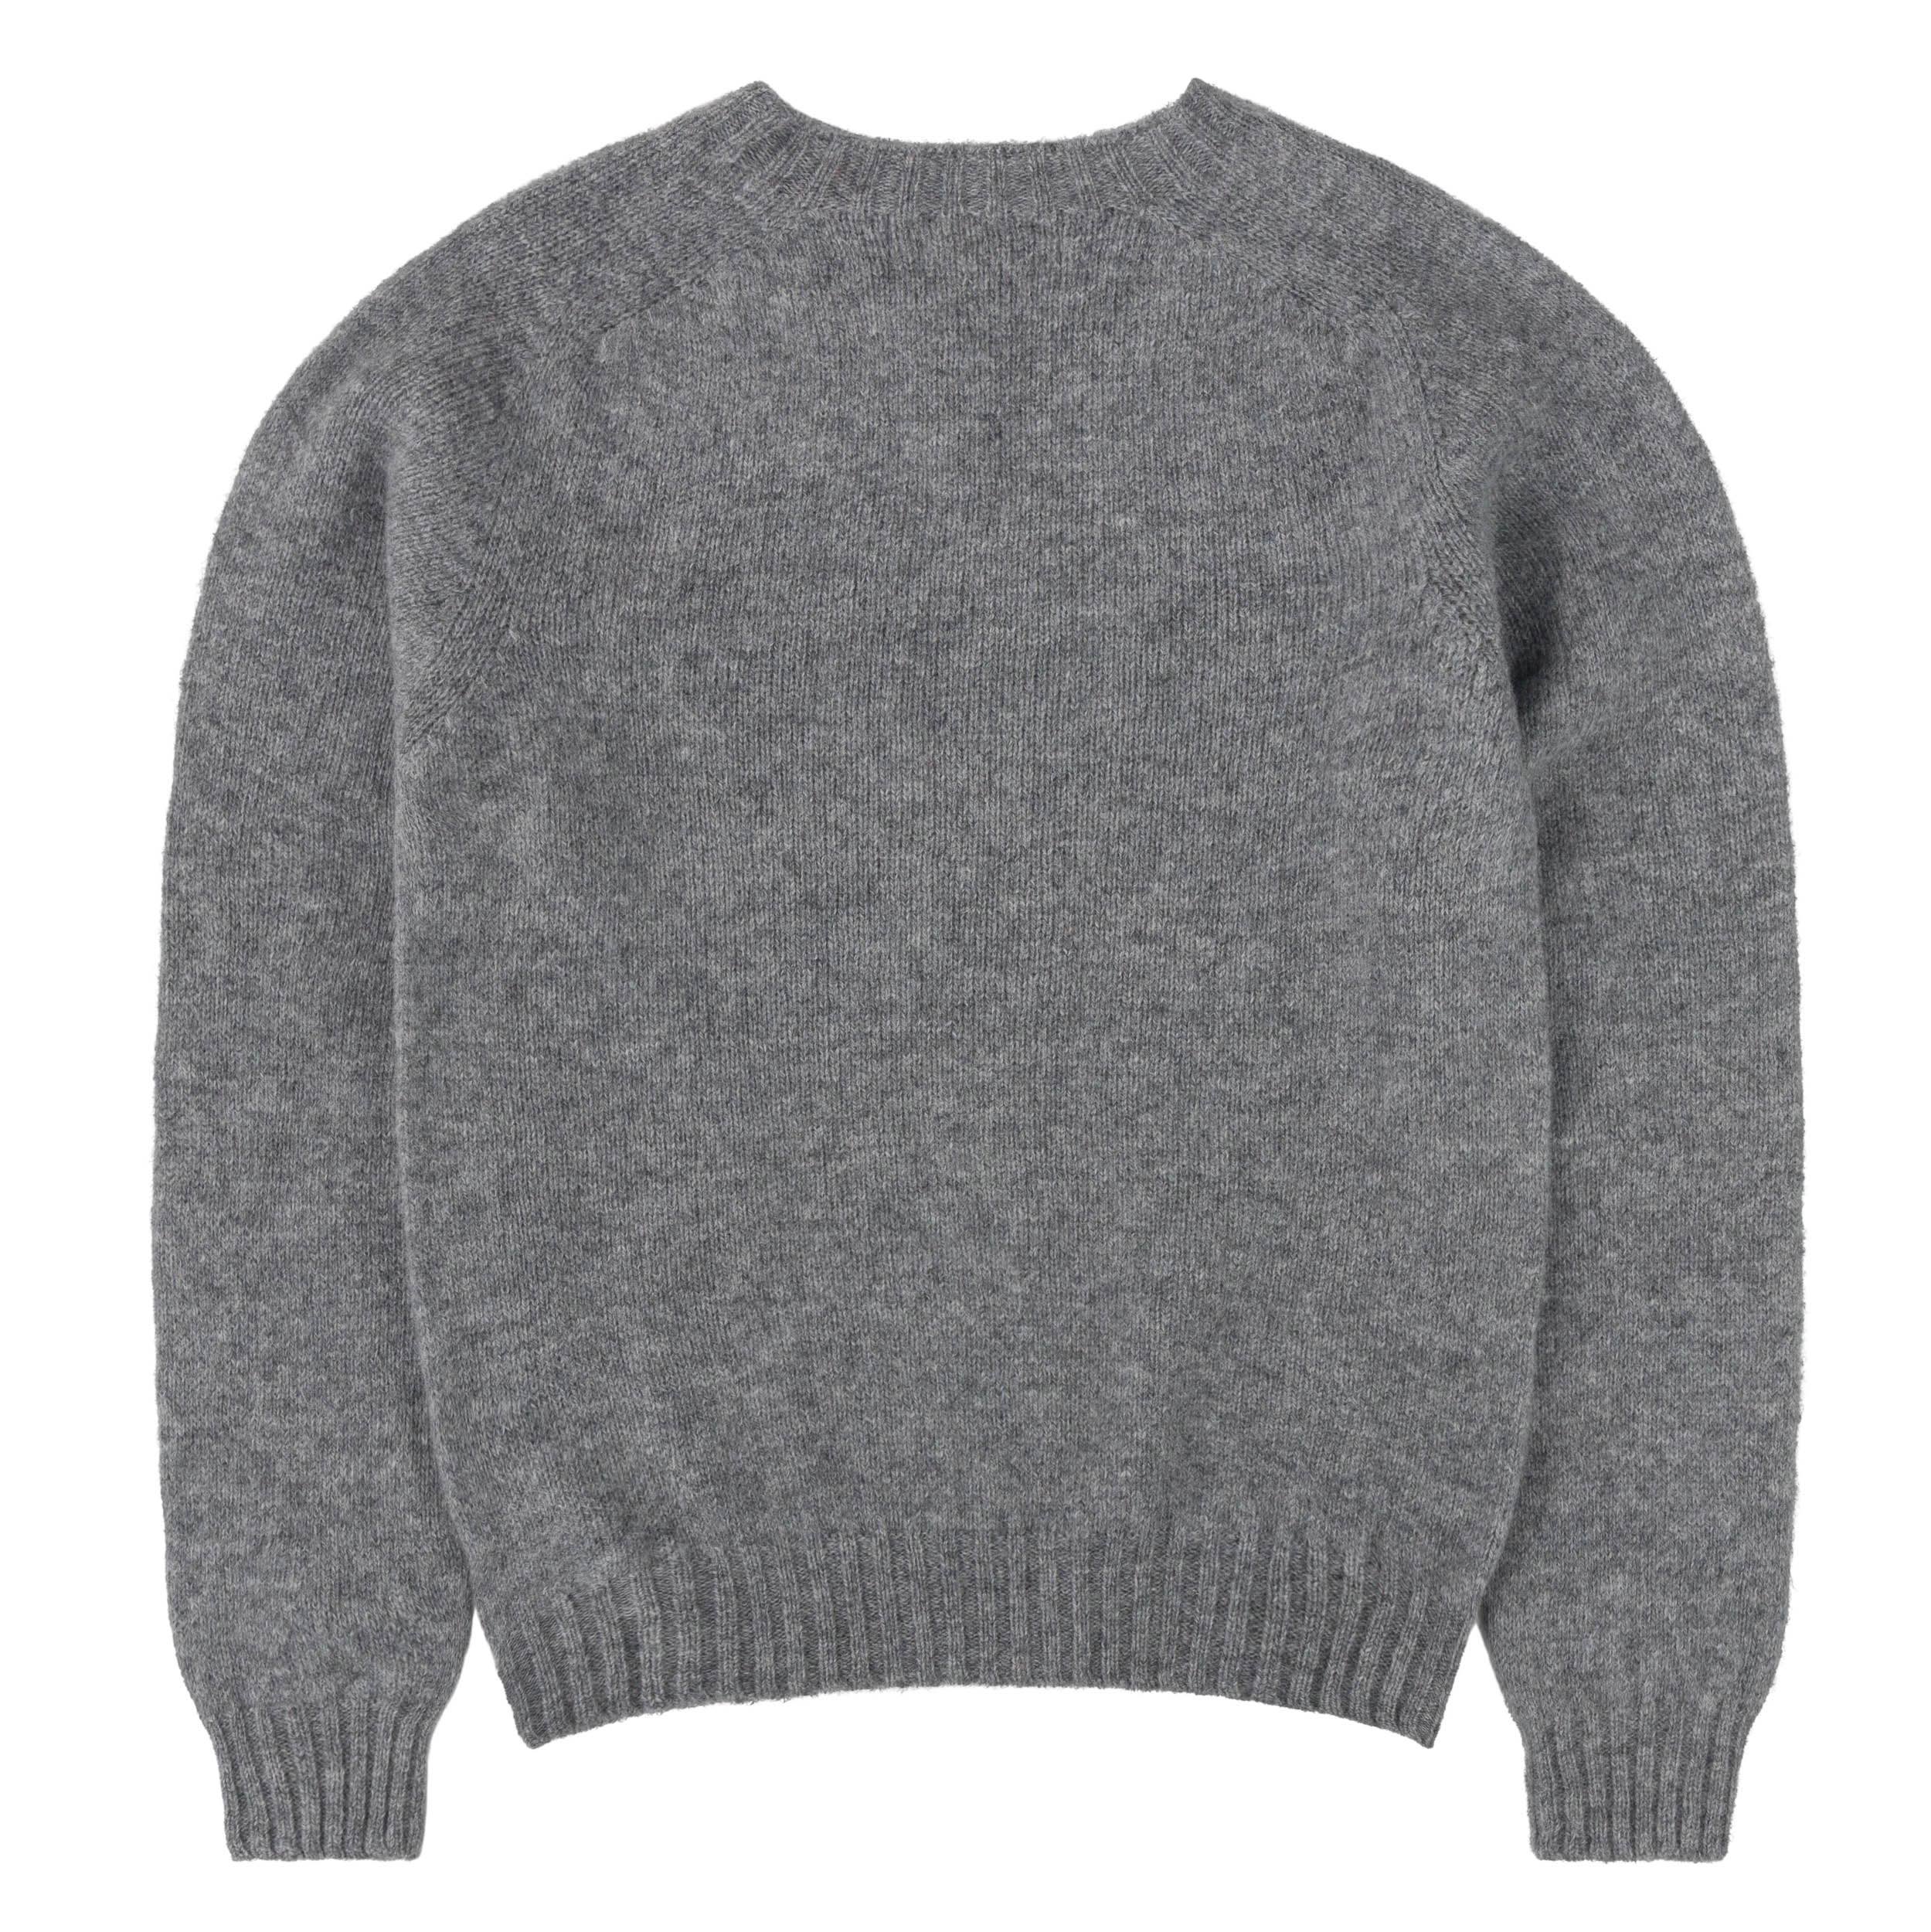 Carrier Company Shetland Lambswool Jumper in Fossil